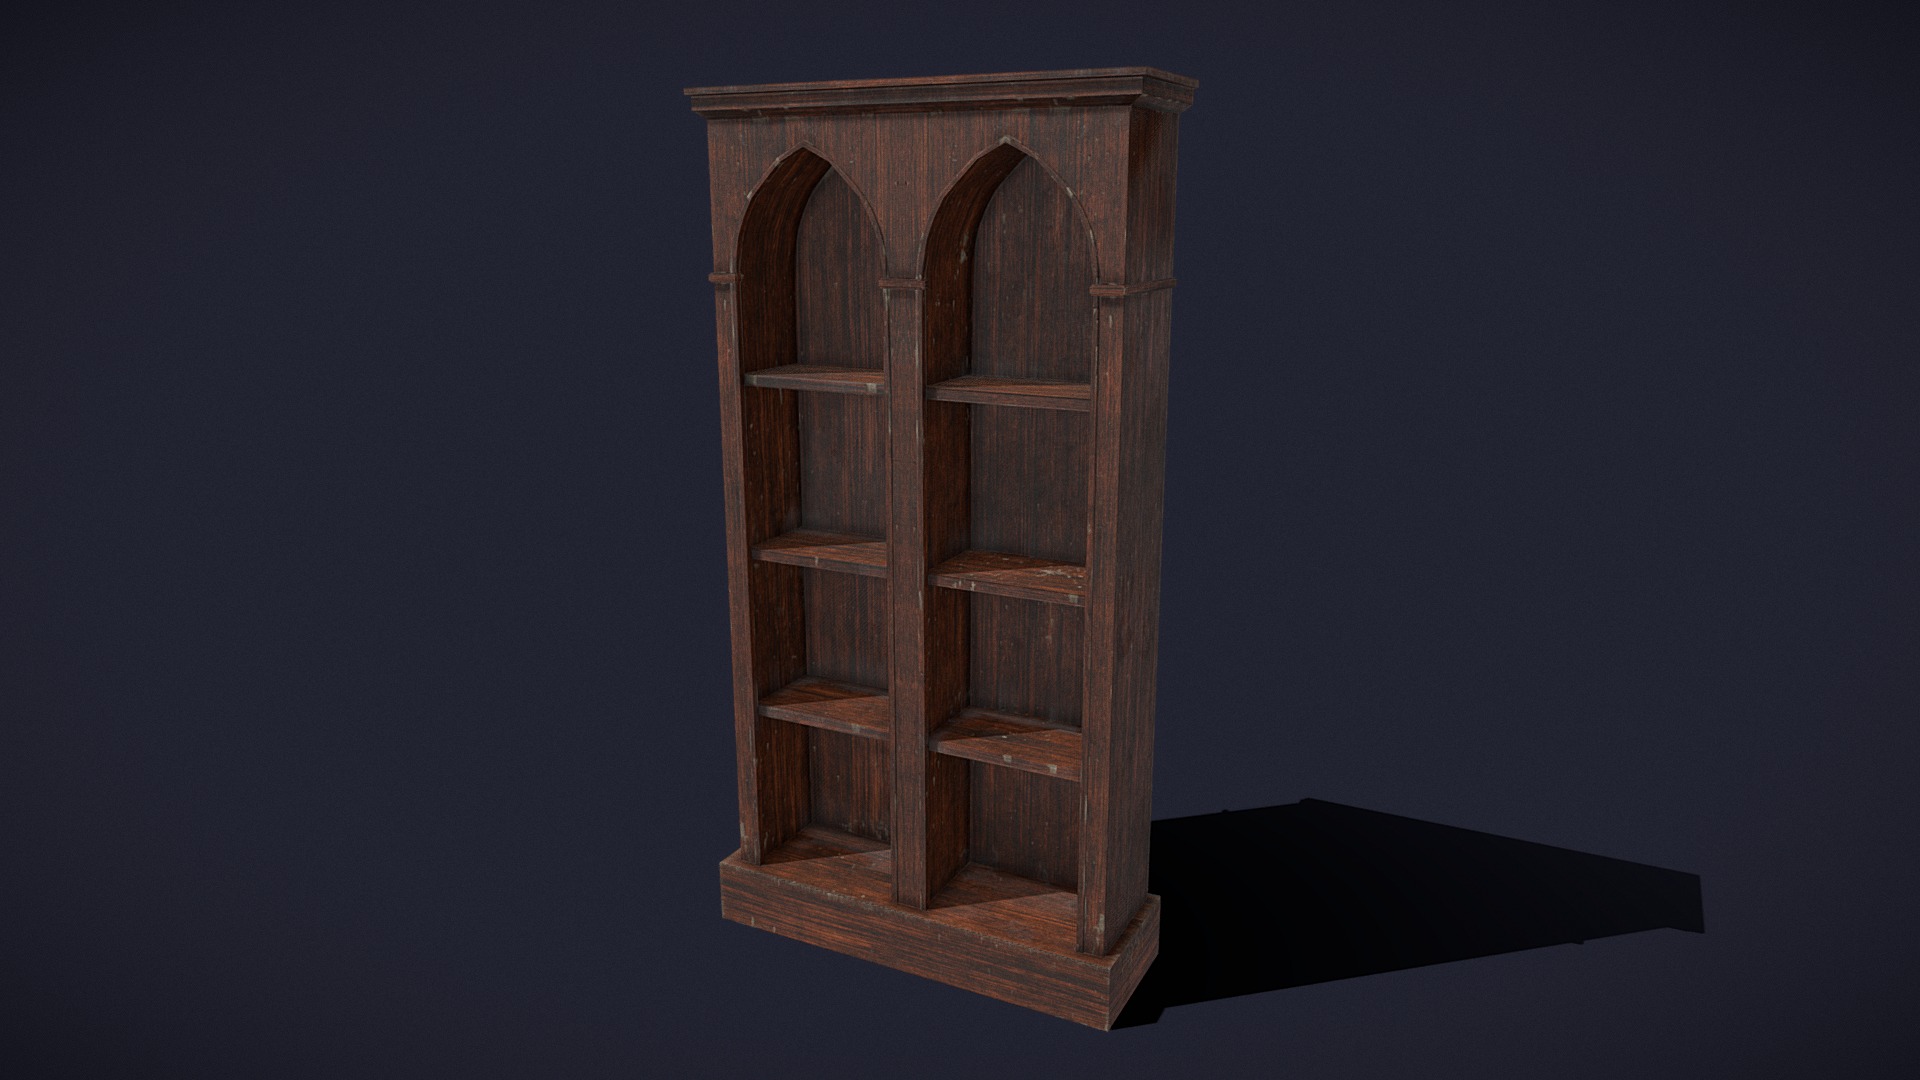 3D model Old Dusty Bookshelf - This is a 3D model of the Old Dusty Bookshelf. The 3D model is about a wooden cabinet with shelves.